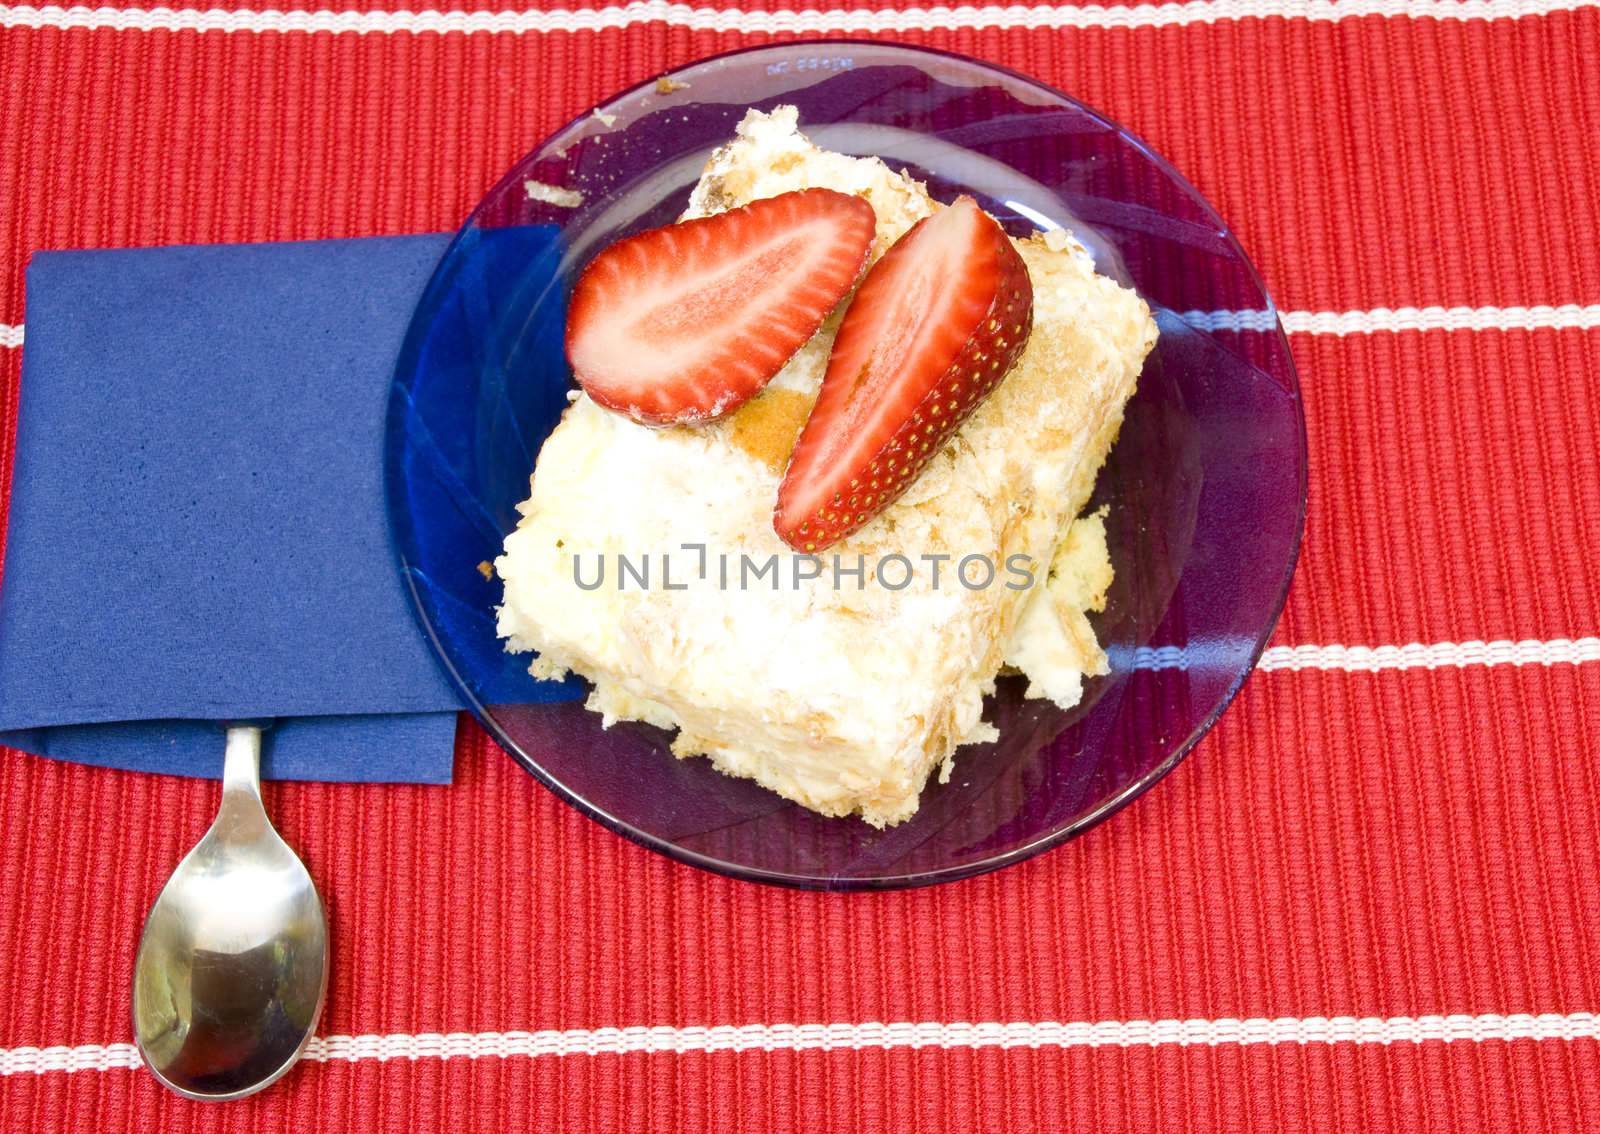 freshly baked cheese cake with organic strawberries